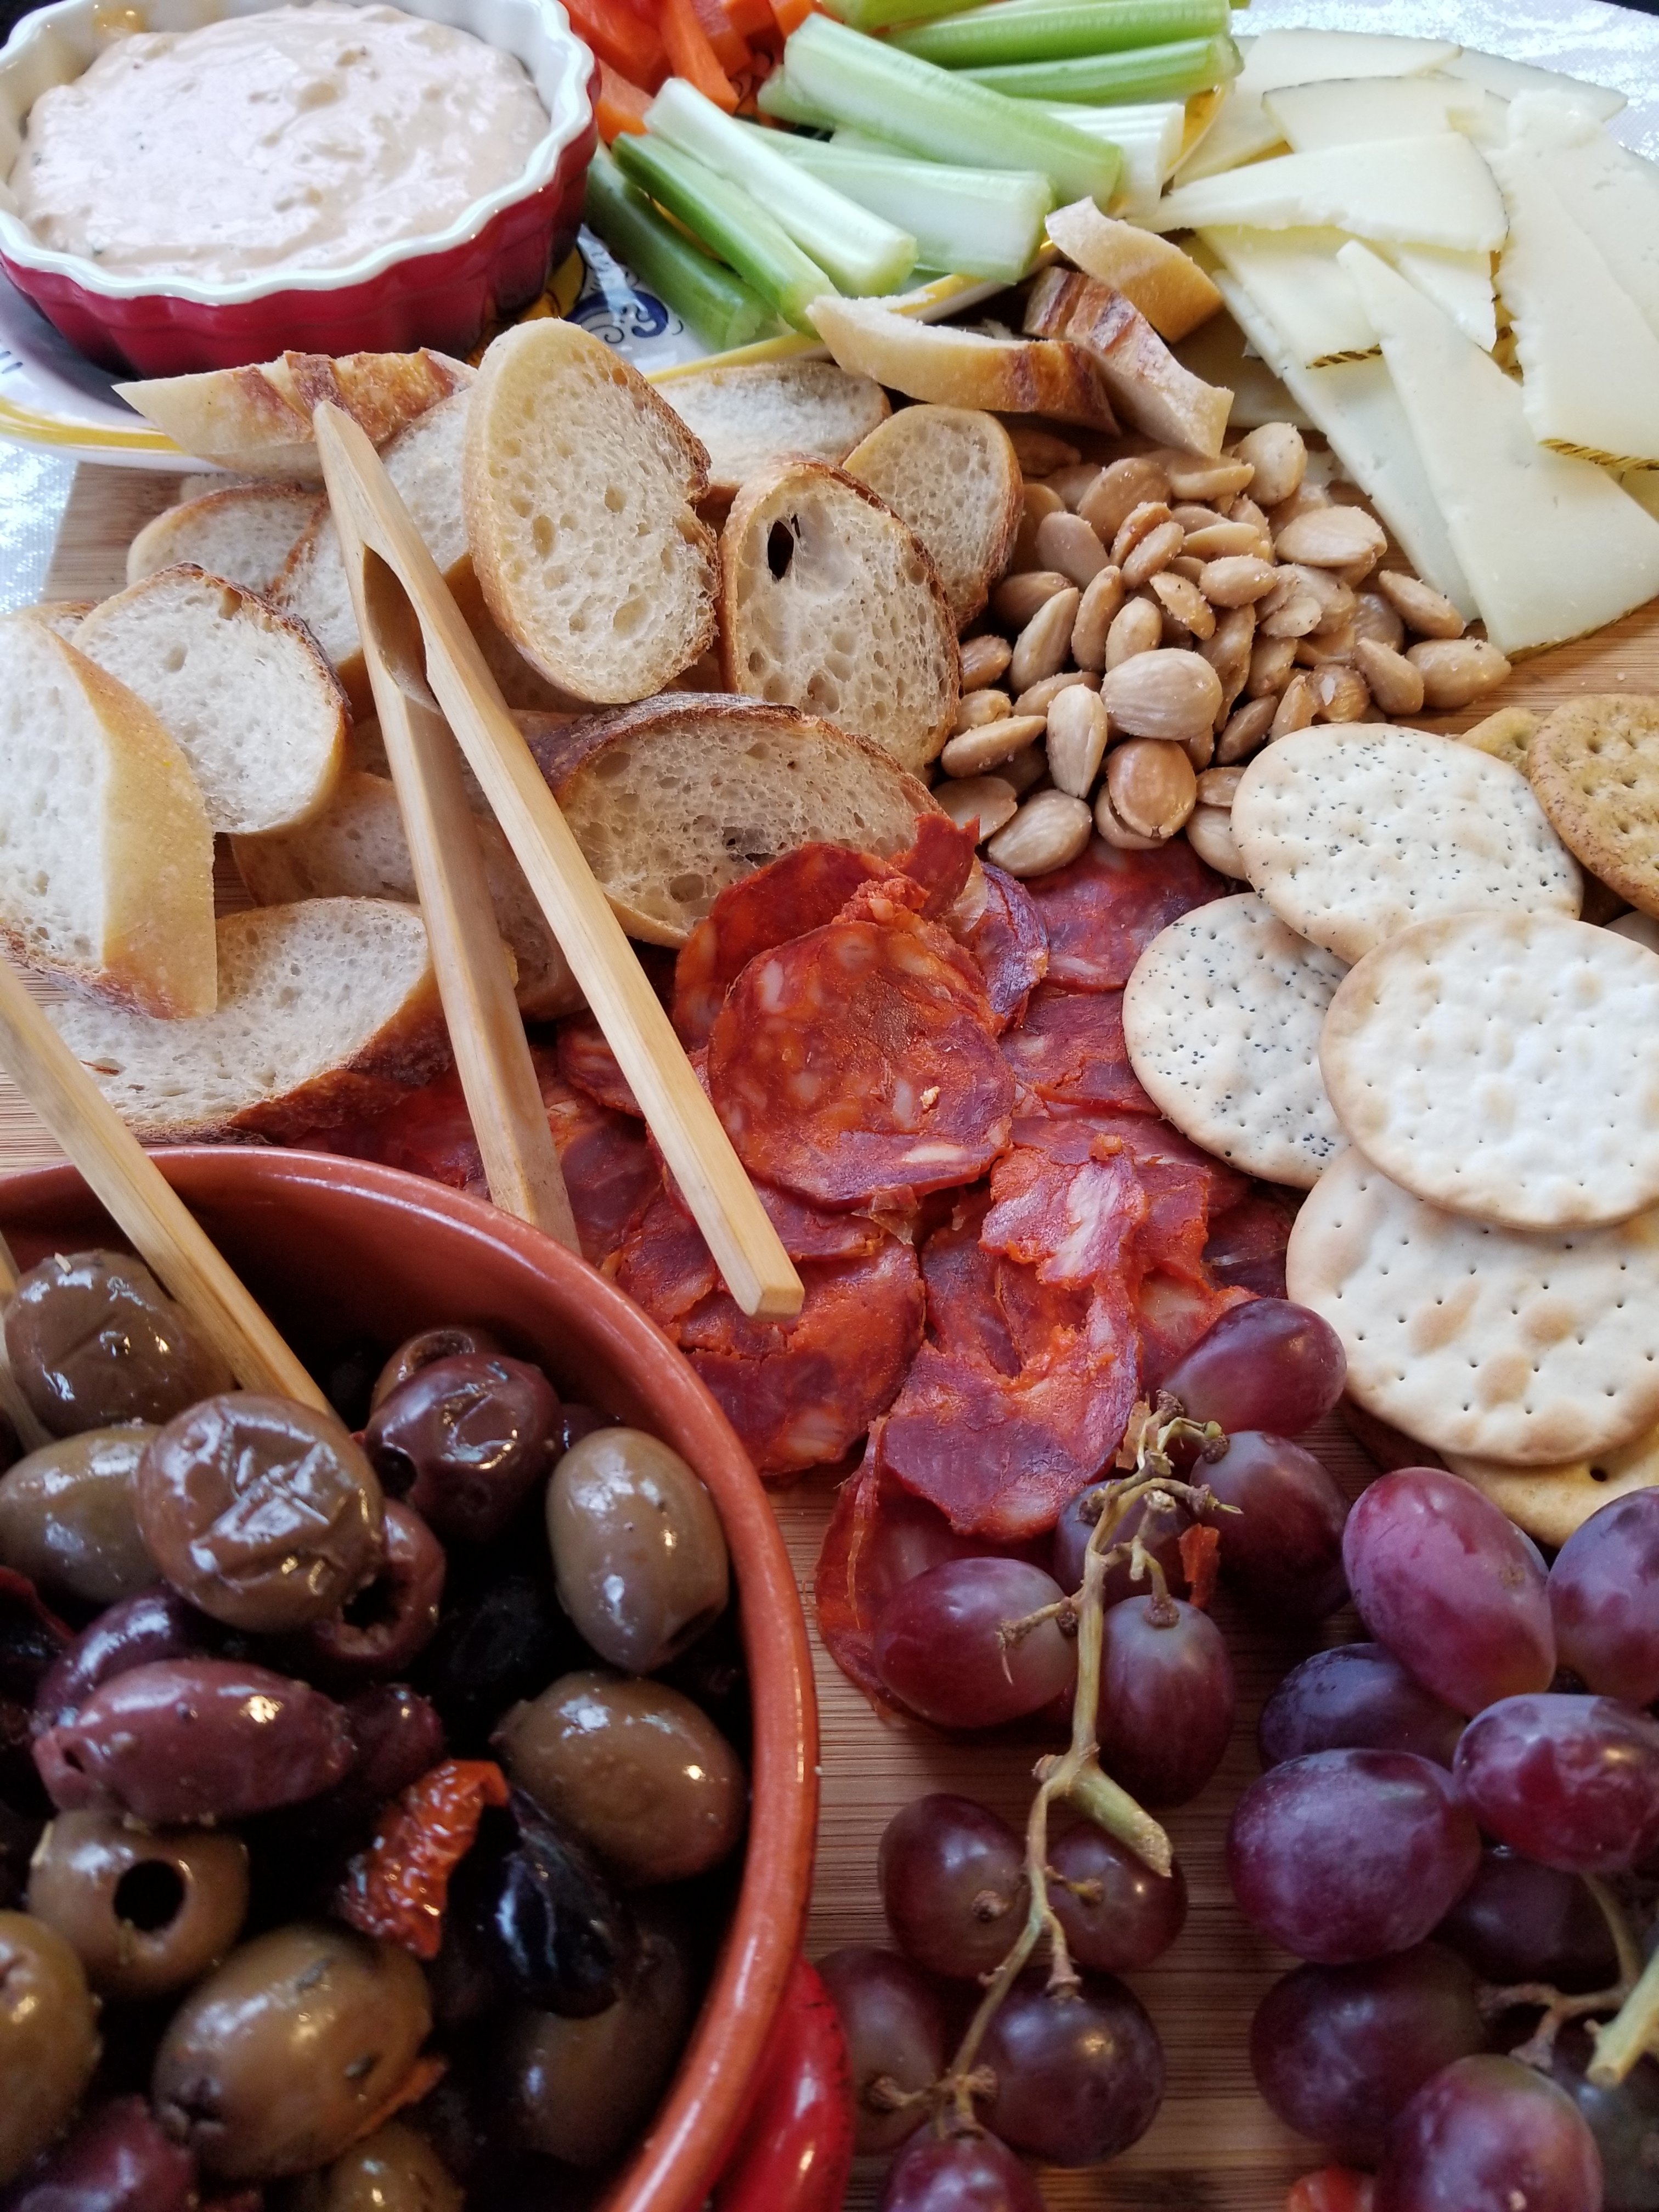 Closeup of the olives, grapes, crackers, and more food items